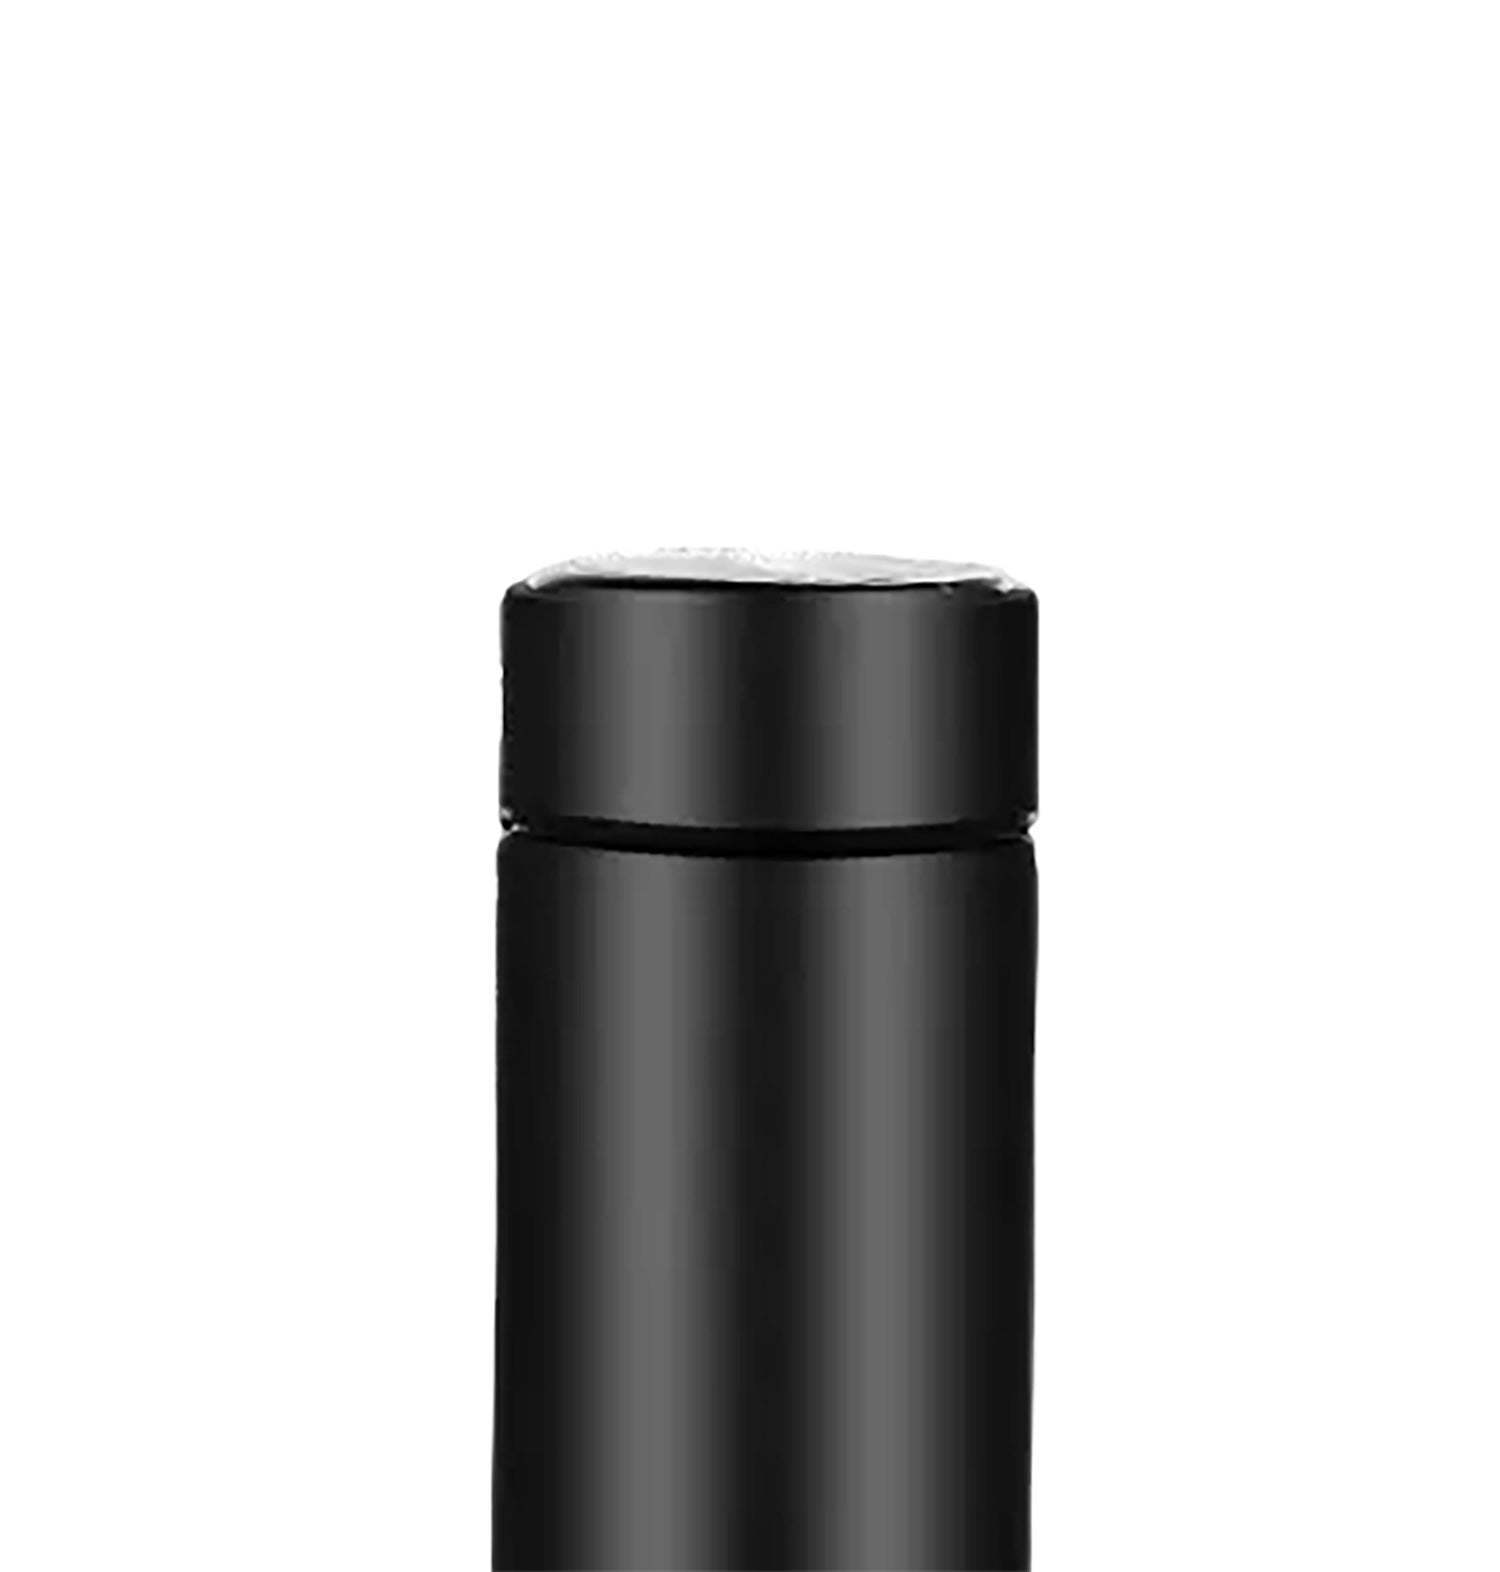 Black Stainless Steel Water Bottle with Temperature Display | Insulated Bottle For Hot and Cold Water - for Kids Birthday & Return Gifts - Apkamart